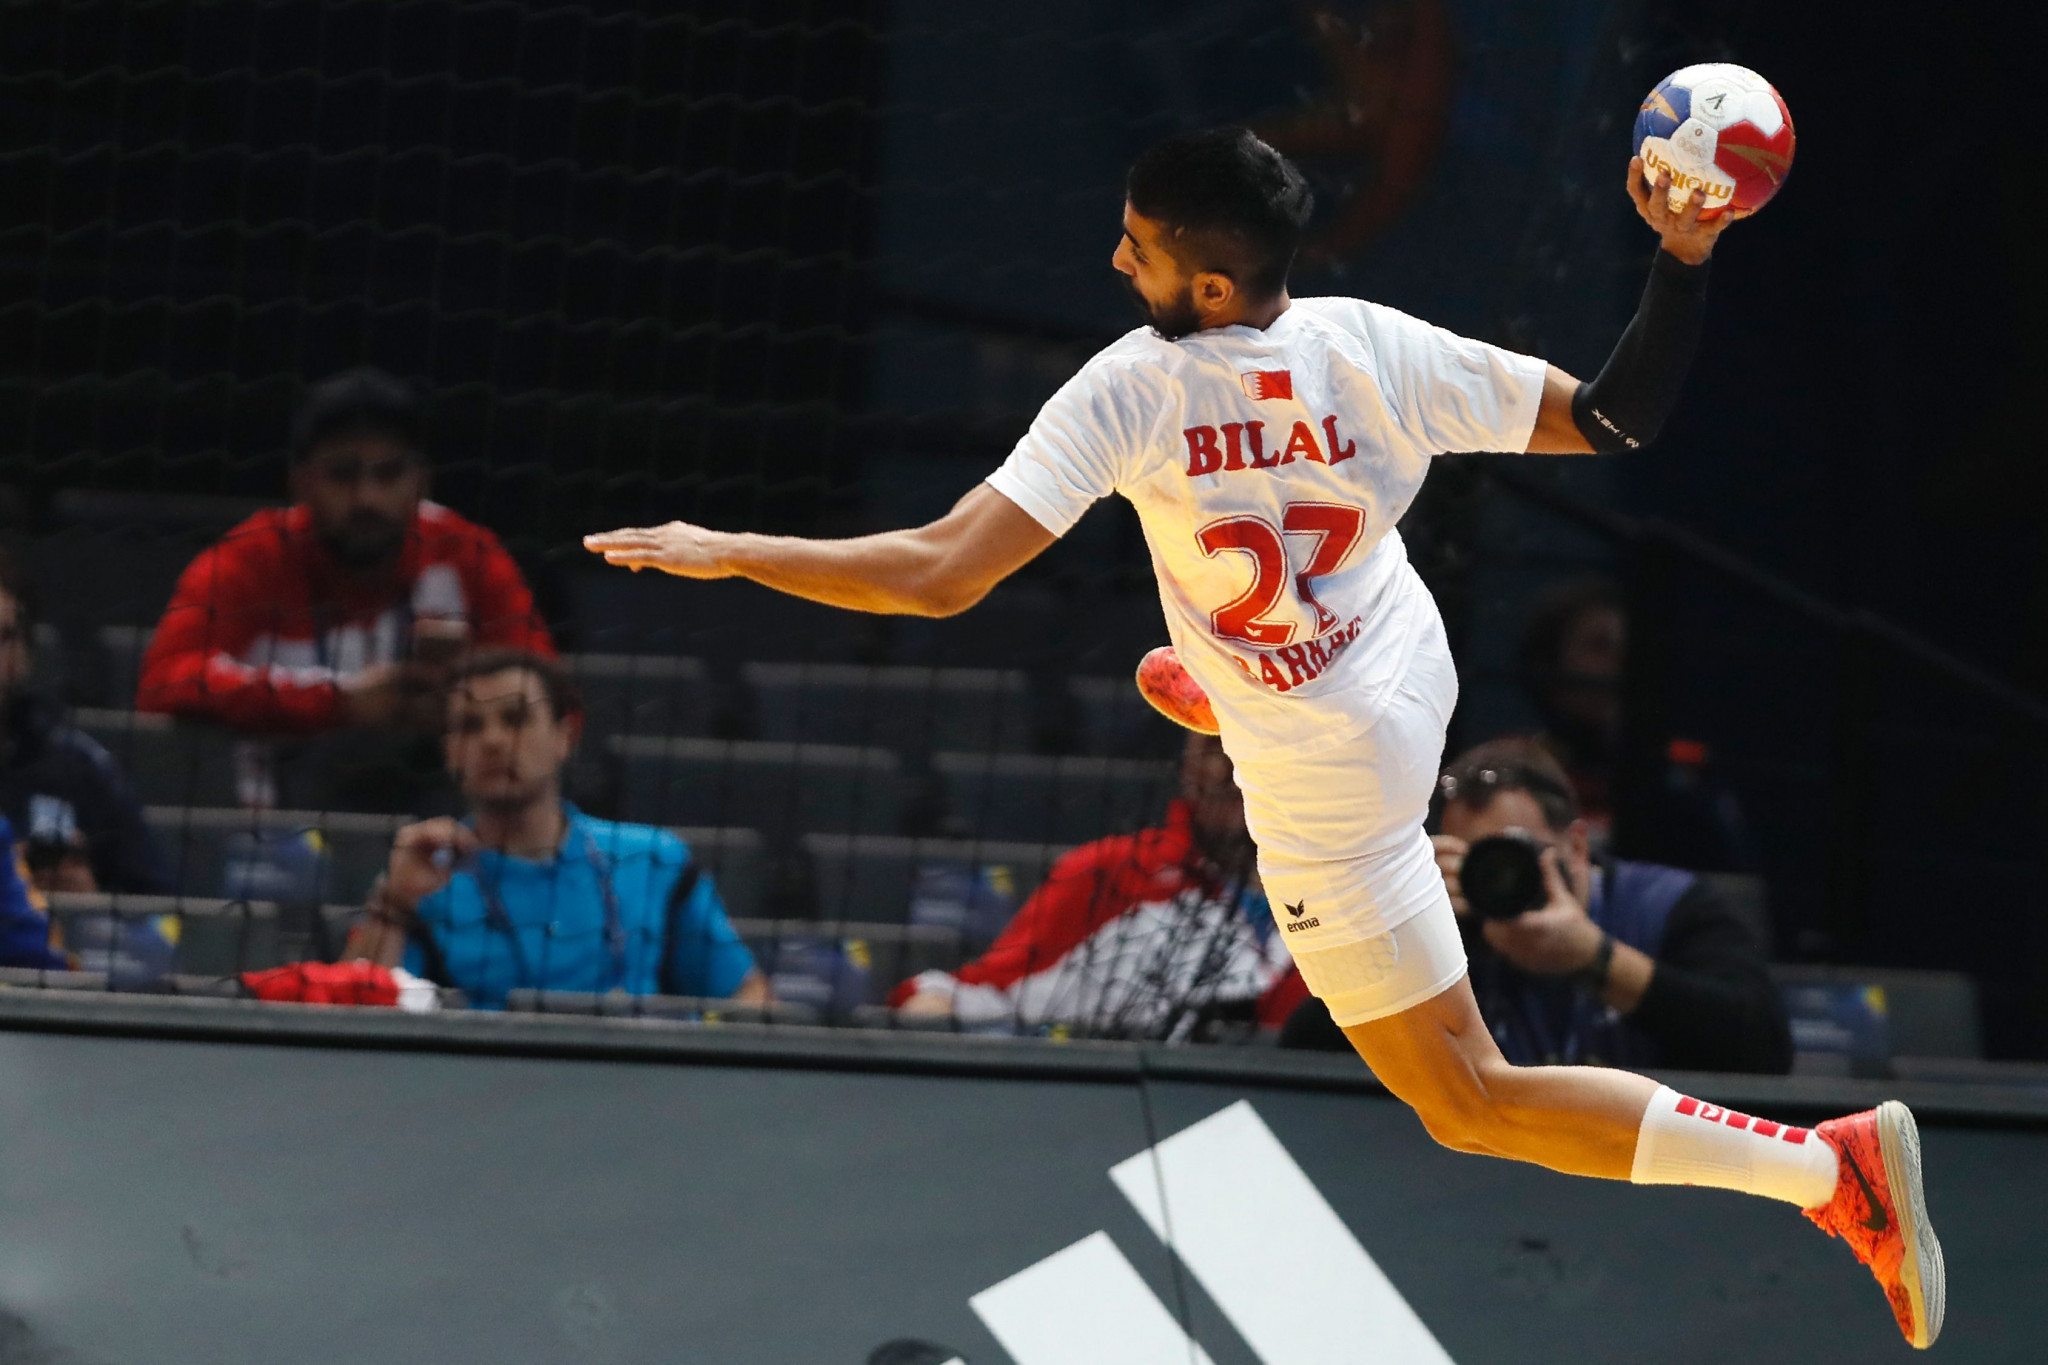 The Bahrain Handball Federation has suggested introducing a third standard colour ©Getty Images